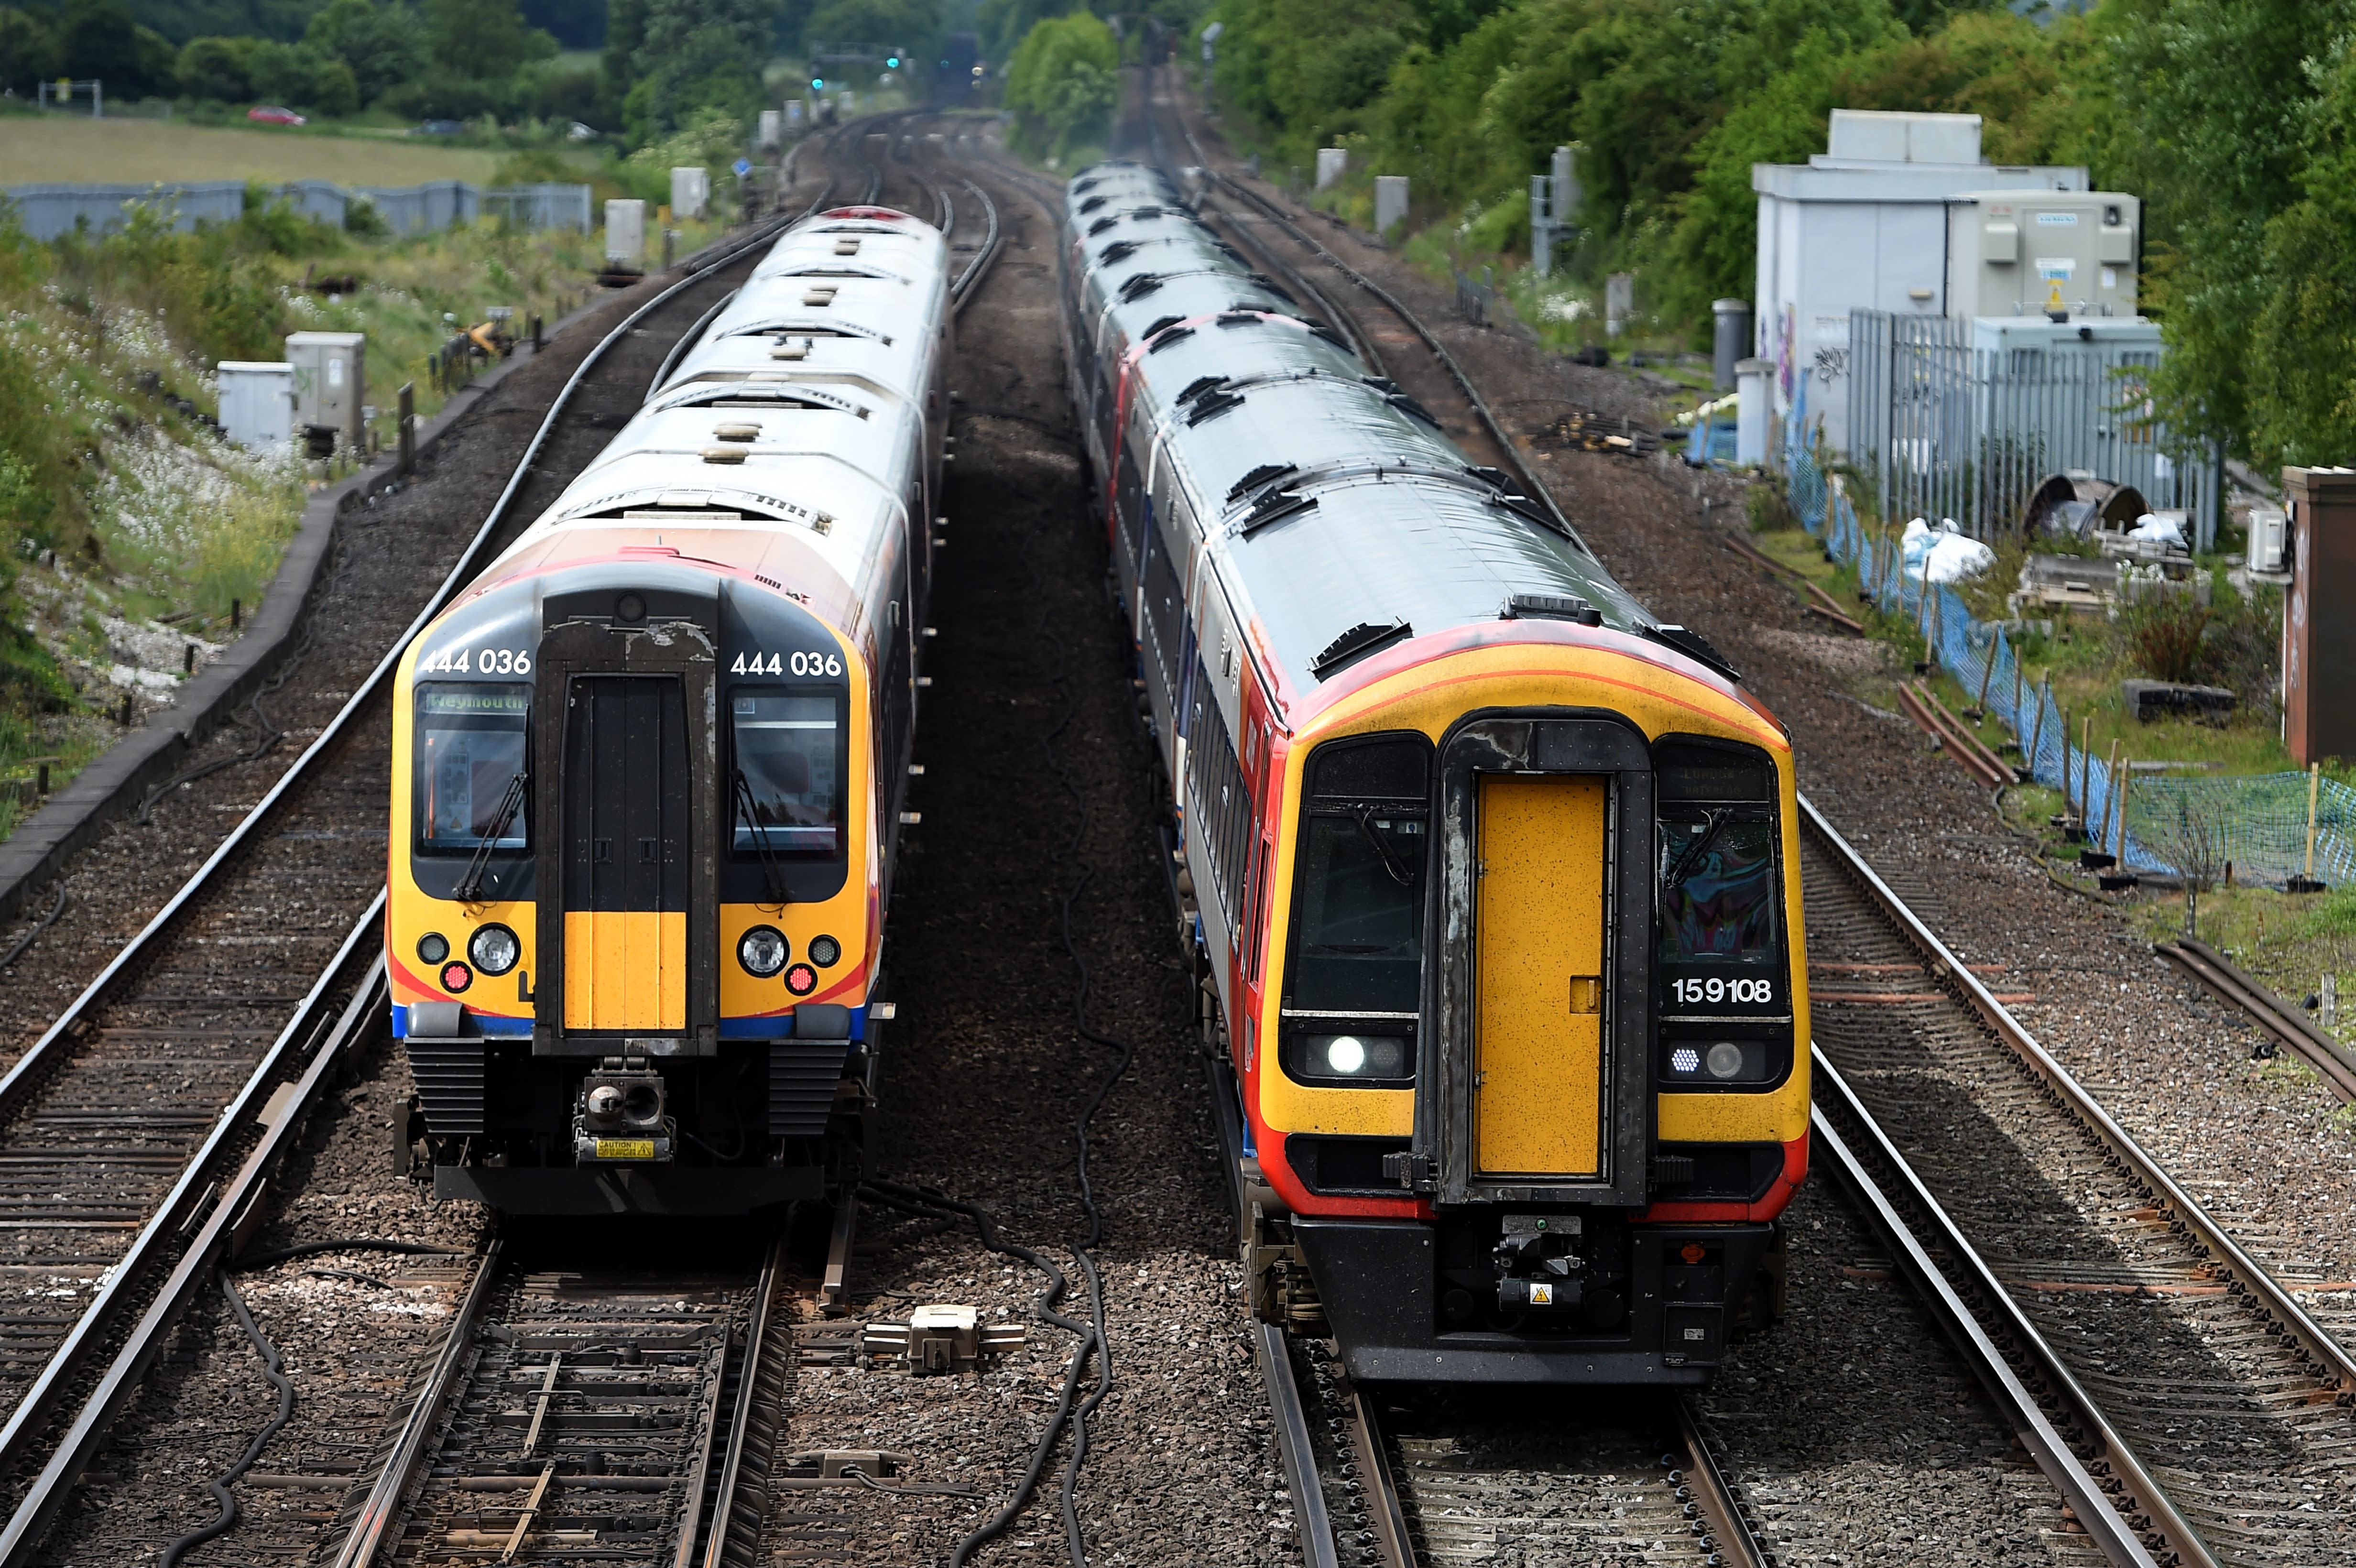 This was the UK's worst train company for punctuality last year